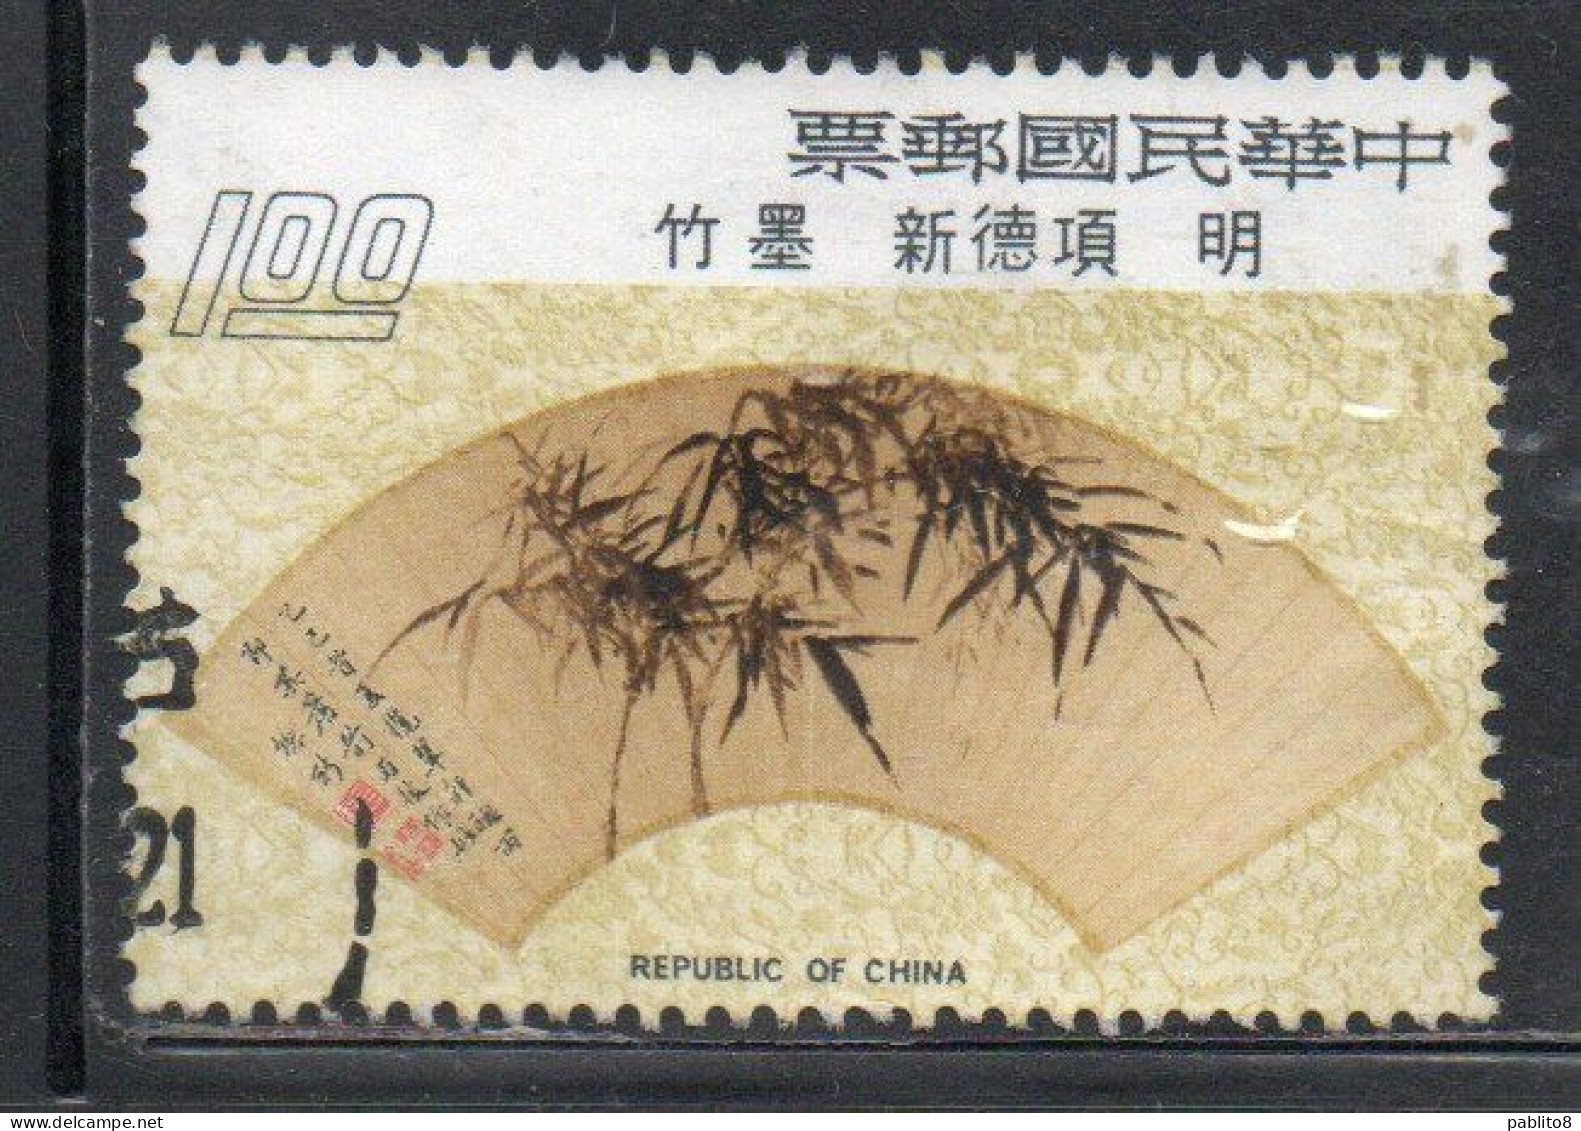 CHINA REPUBLIC CINA TAIWAN FORMOSA 1973 PAINTED FANS MING DYNASTY FAN BAMBOO DESIGN HSIANG TEHSIN 1$ USED USATO OBLITERE - Used Stamps